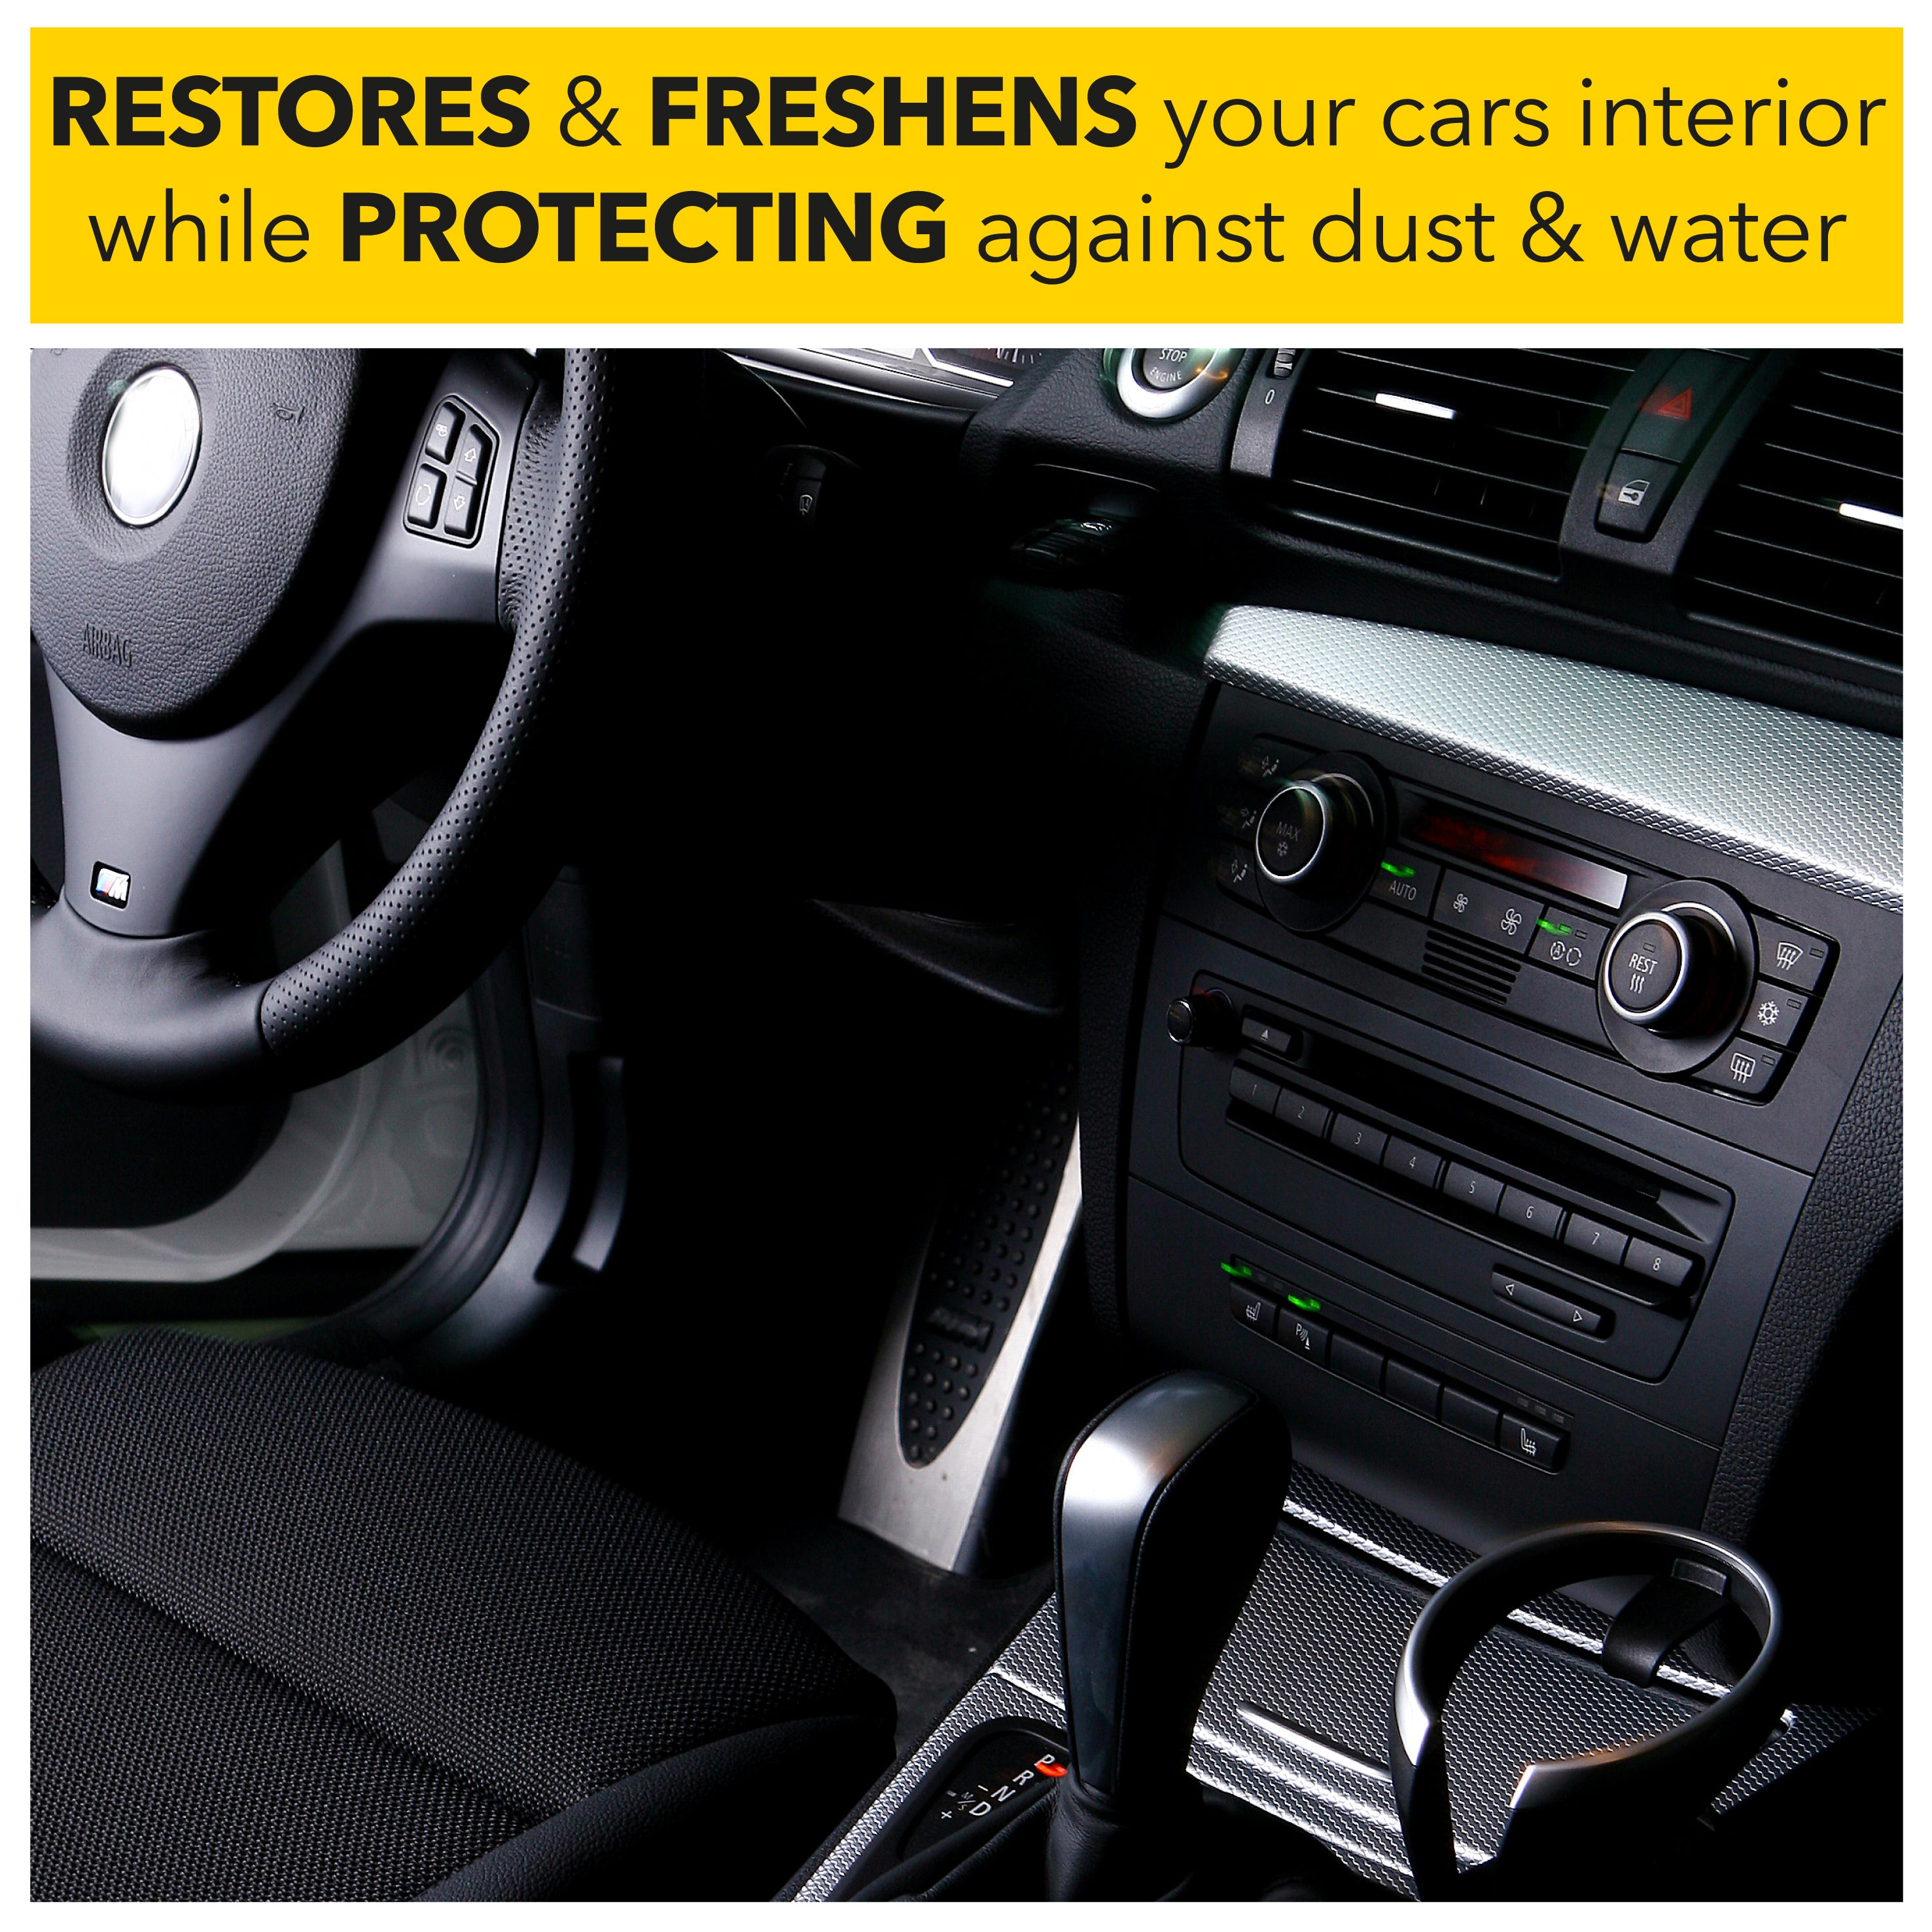 restores and freshens your car interior while protecting against dust and water